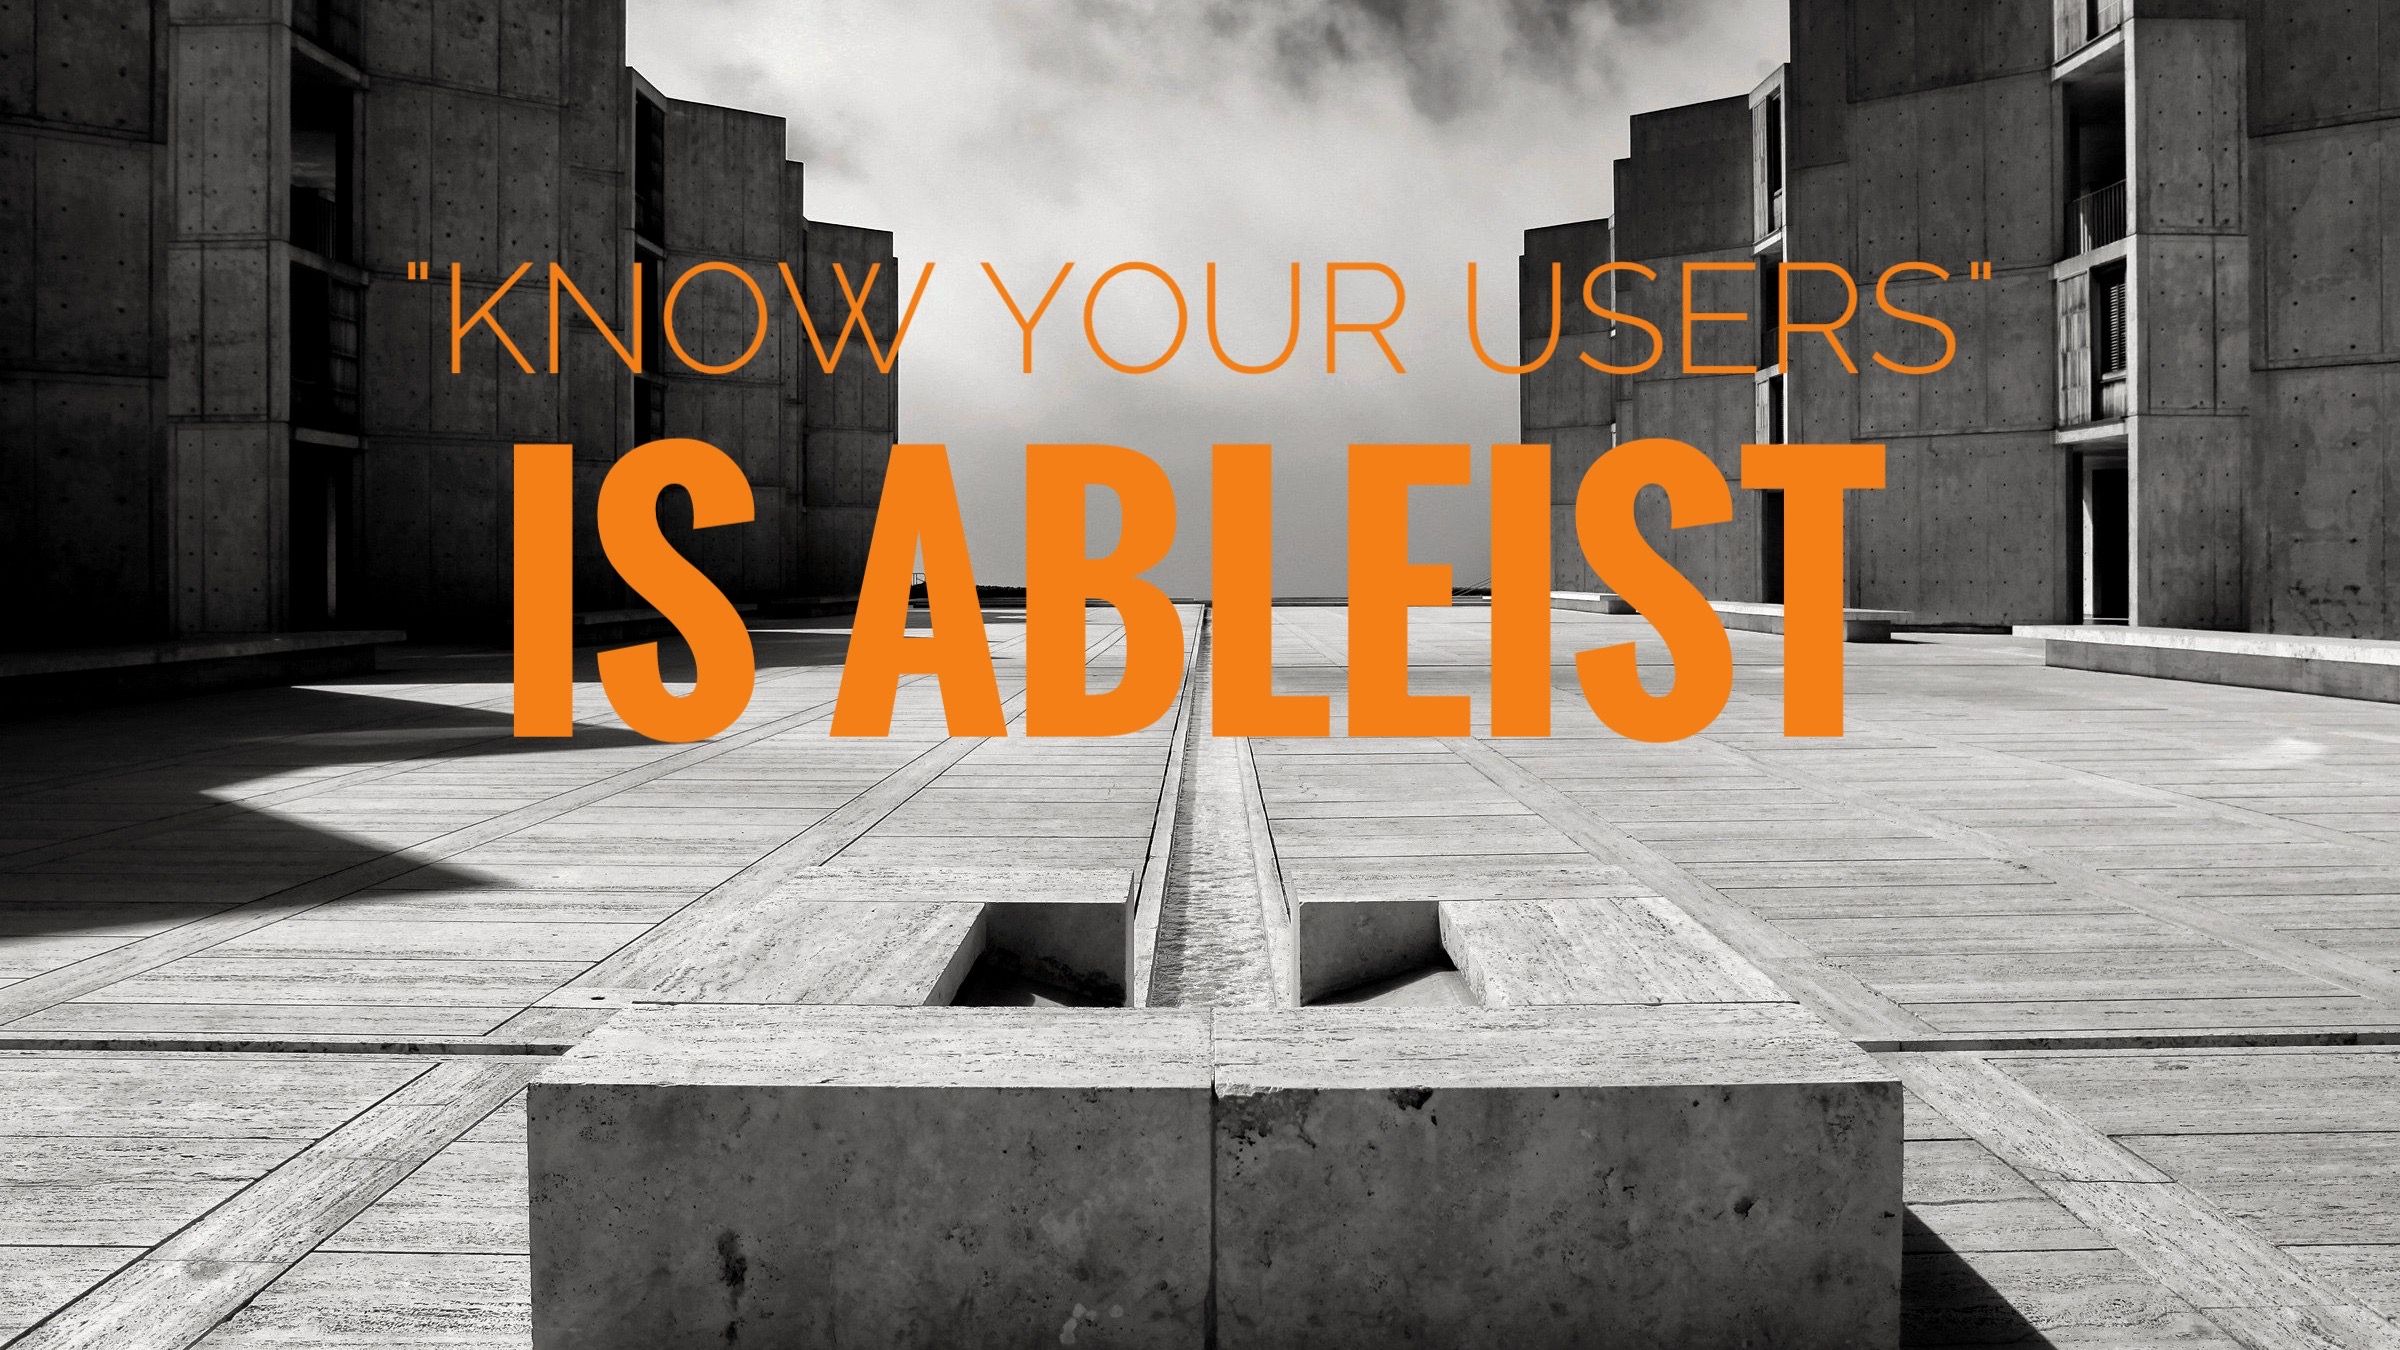 Know you users is ableist